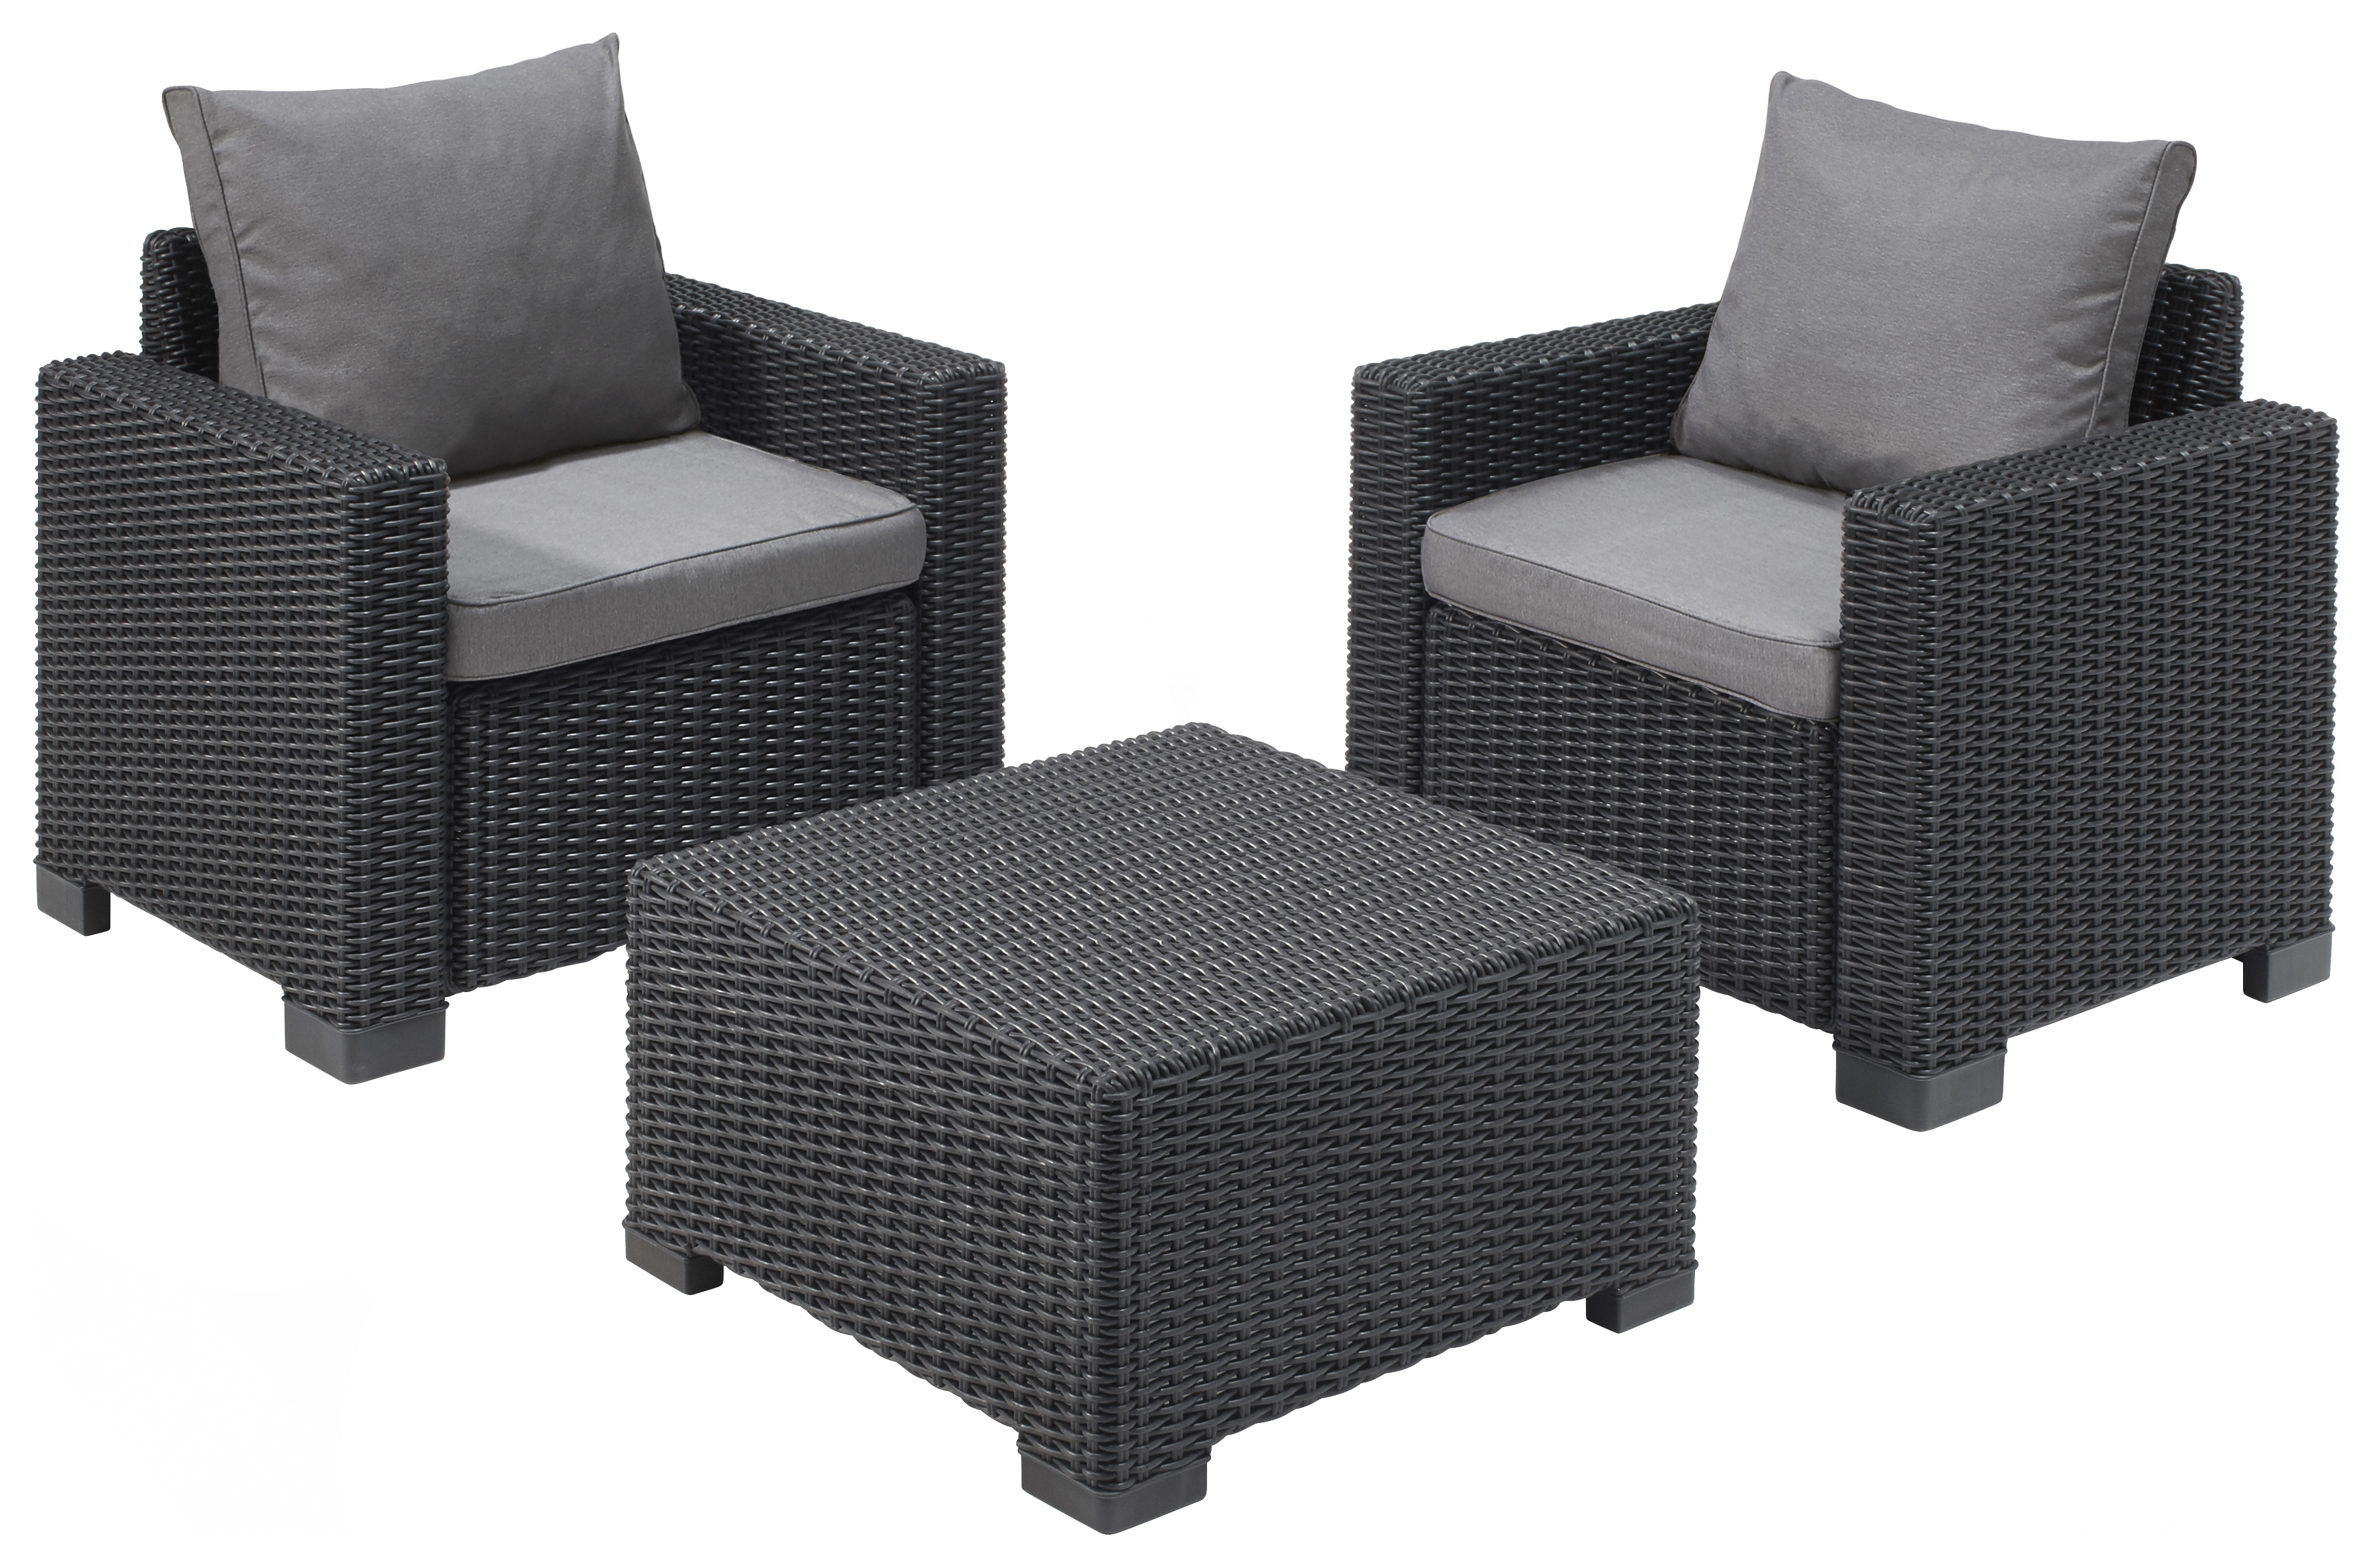 Keter California 2 Seater Outdoor Balcony Garden Furniture Set - Graphite with Grey Cushions